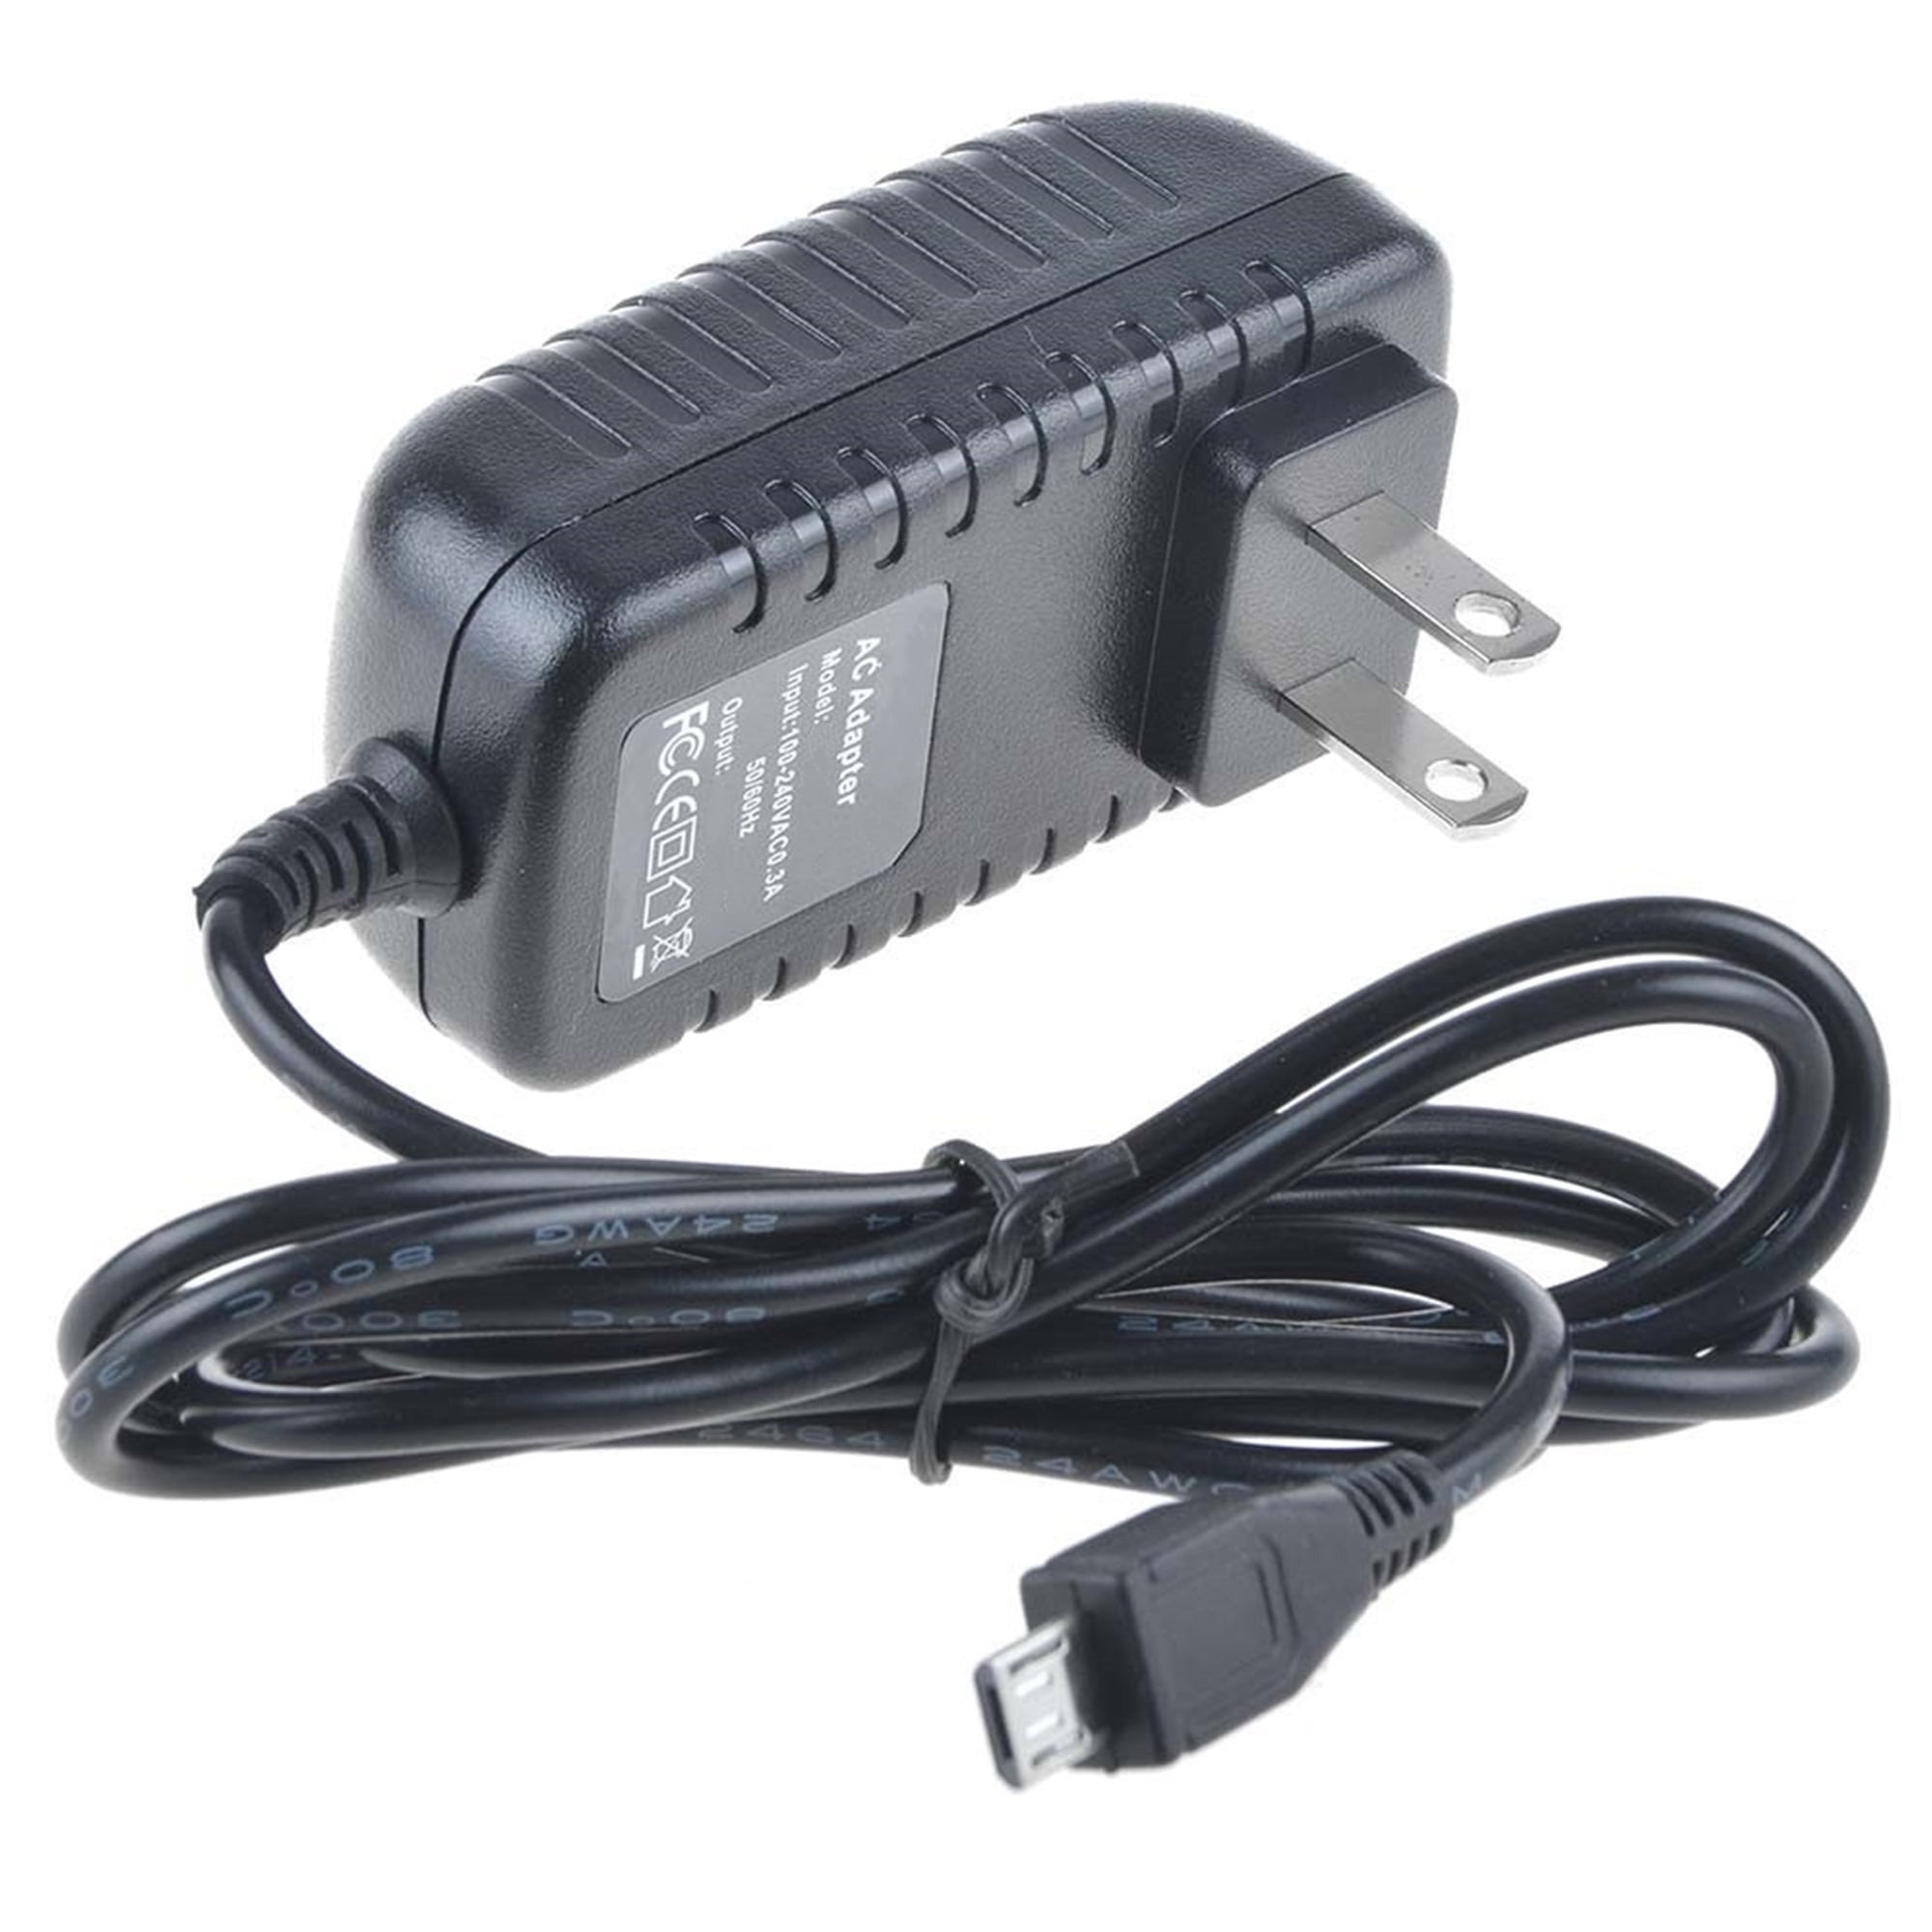 5V 2A 10W AC Power Charger Adapter for ASUS Transformer Pad MG10 MG103c TF103c 